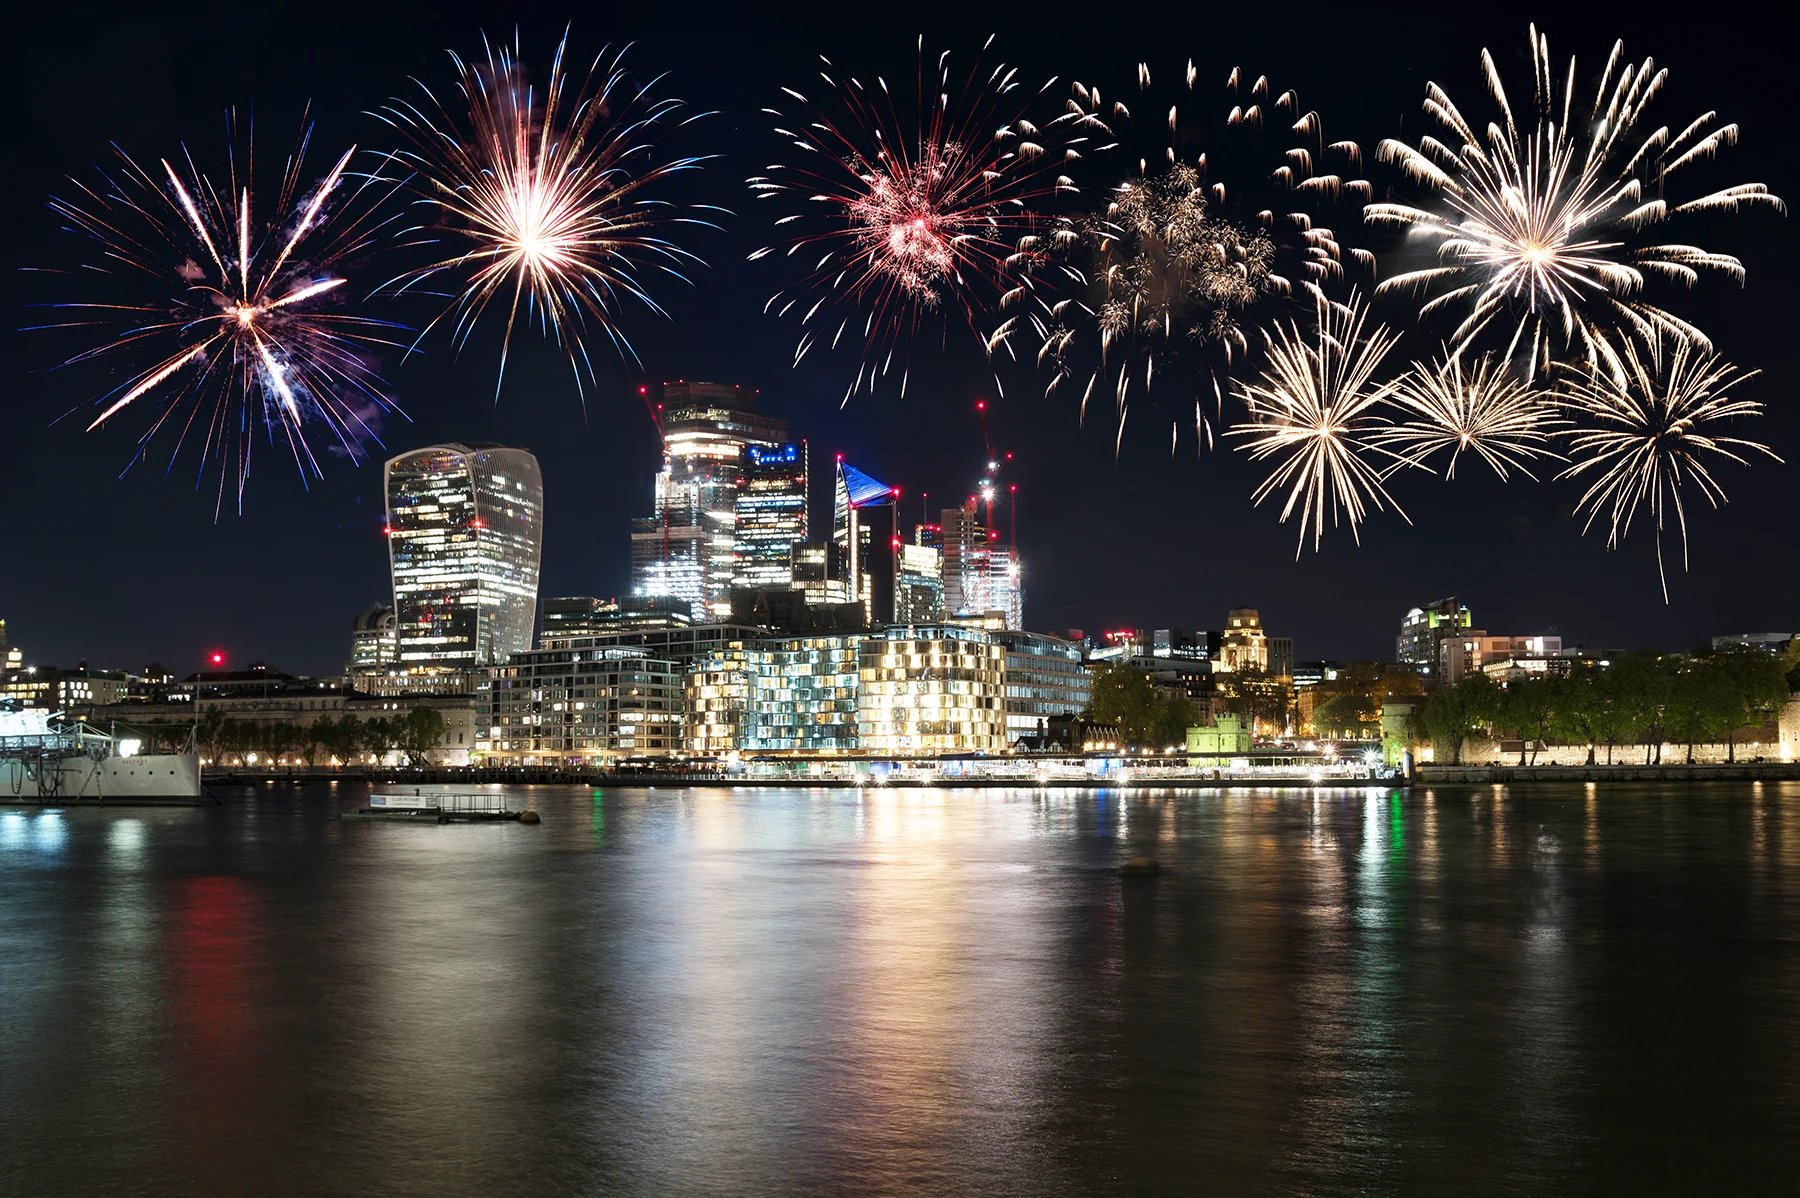 Fireworks exploding in the night sky over the river Thames in central London. 